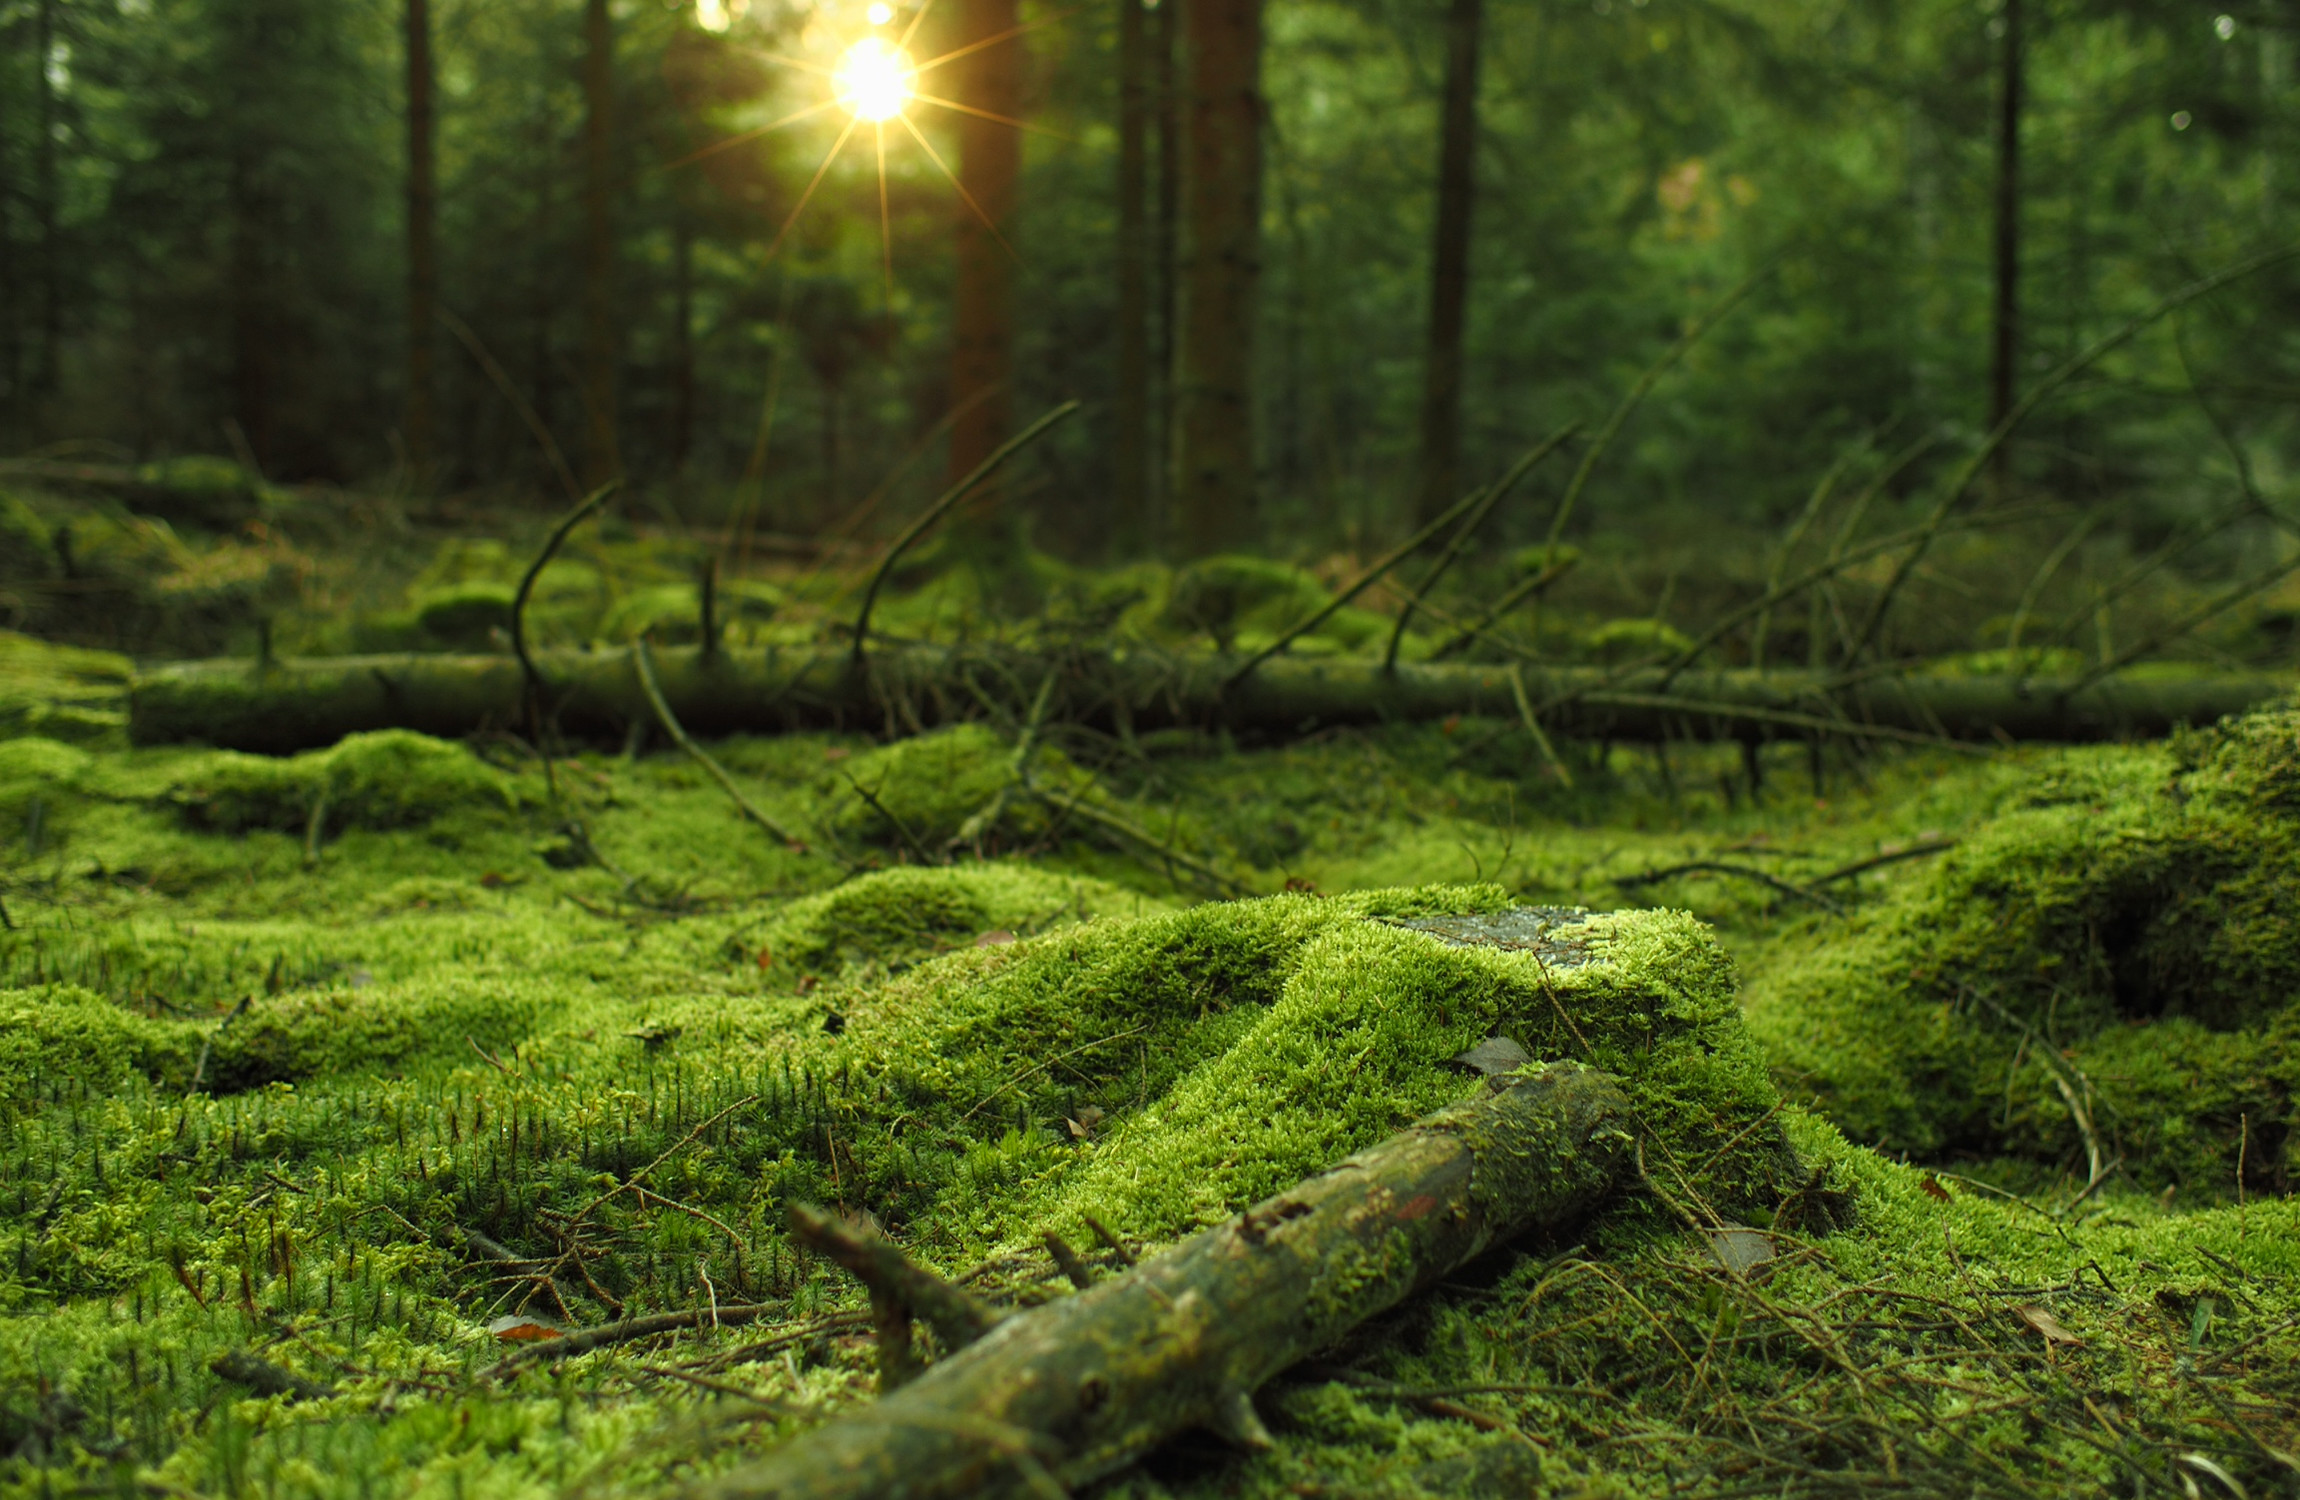 Mossy Forest Hd Wallpaper Download 2300x1500